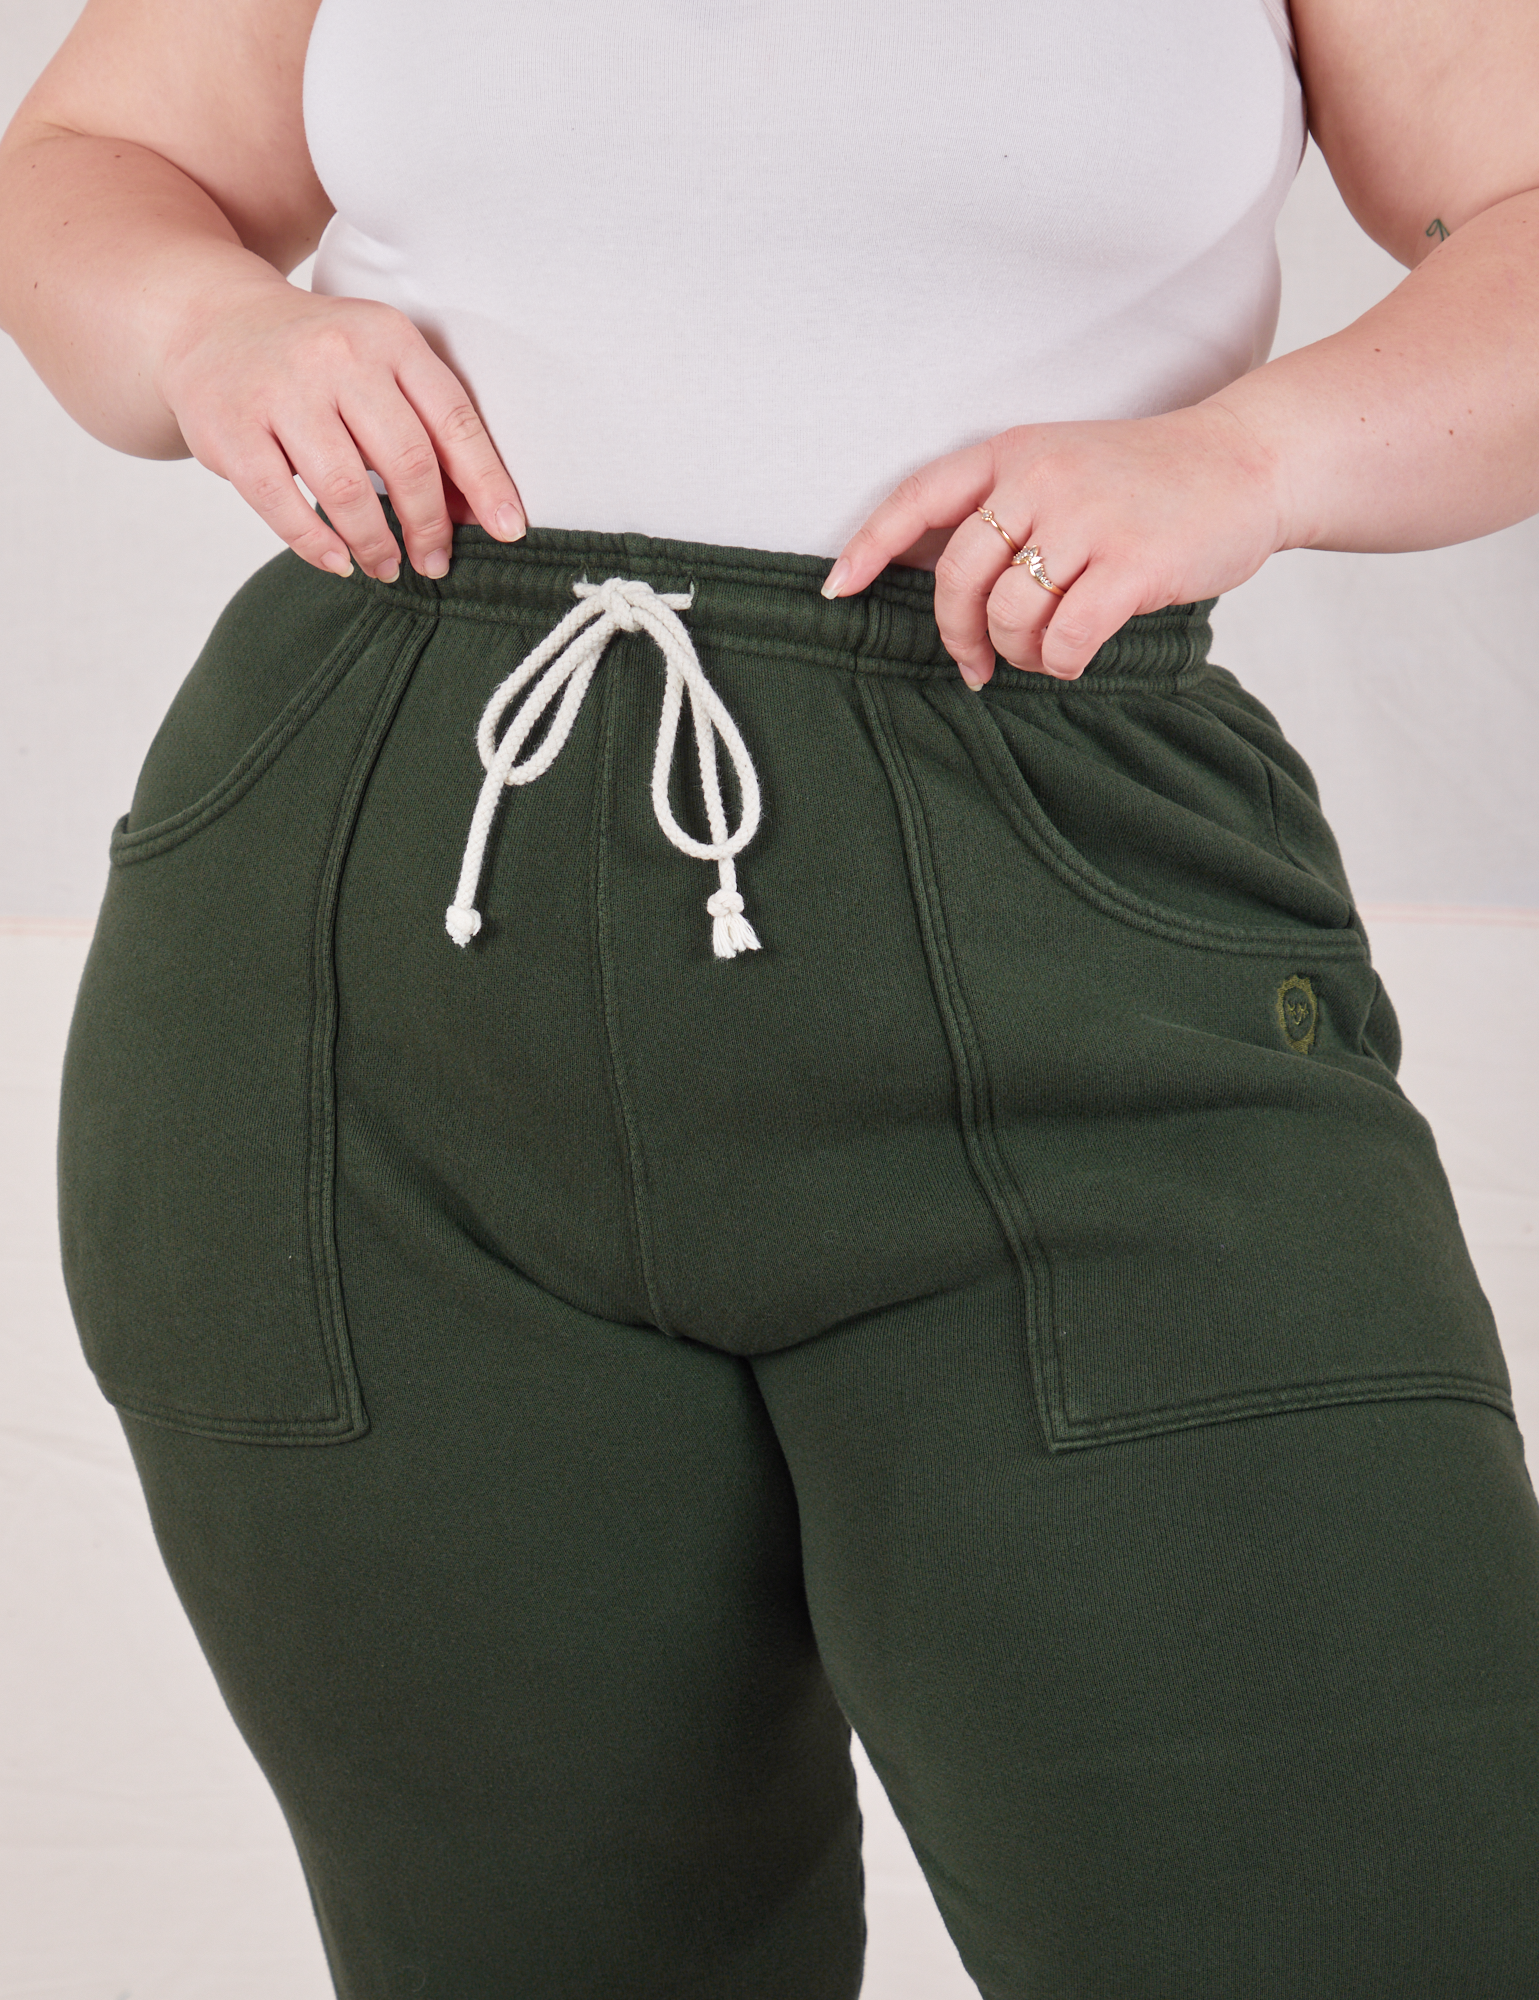 Rolled Cuff Sweat Pants in Swamp Green front close up on Ashley